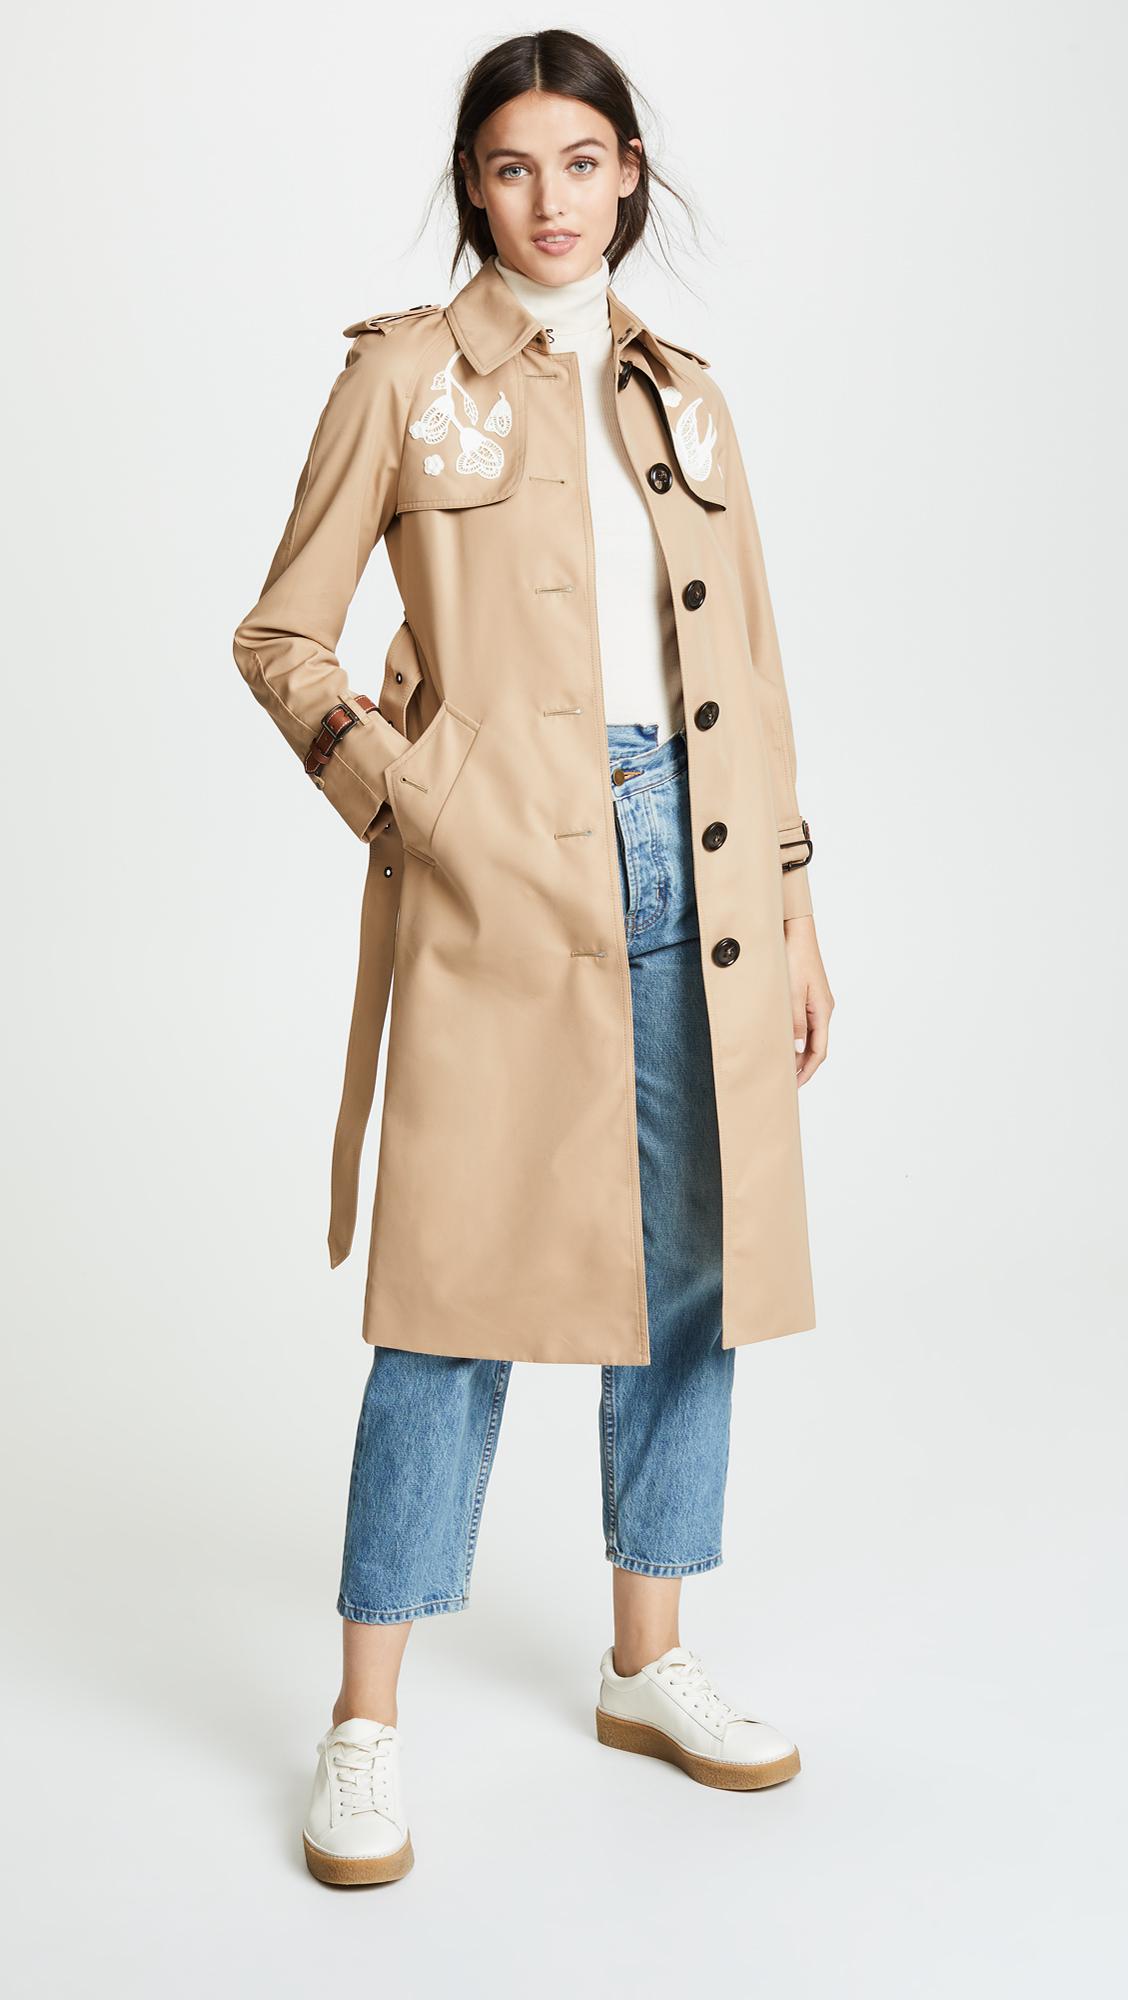 COACH Lace Embroidered Trench Coat in Khaki (Natural) - Lyst